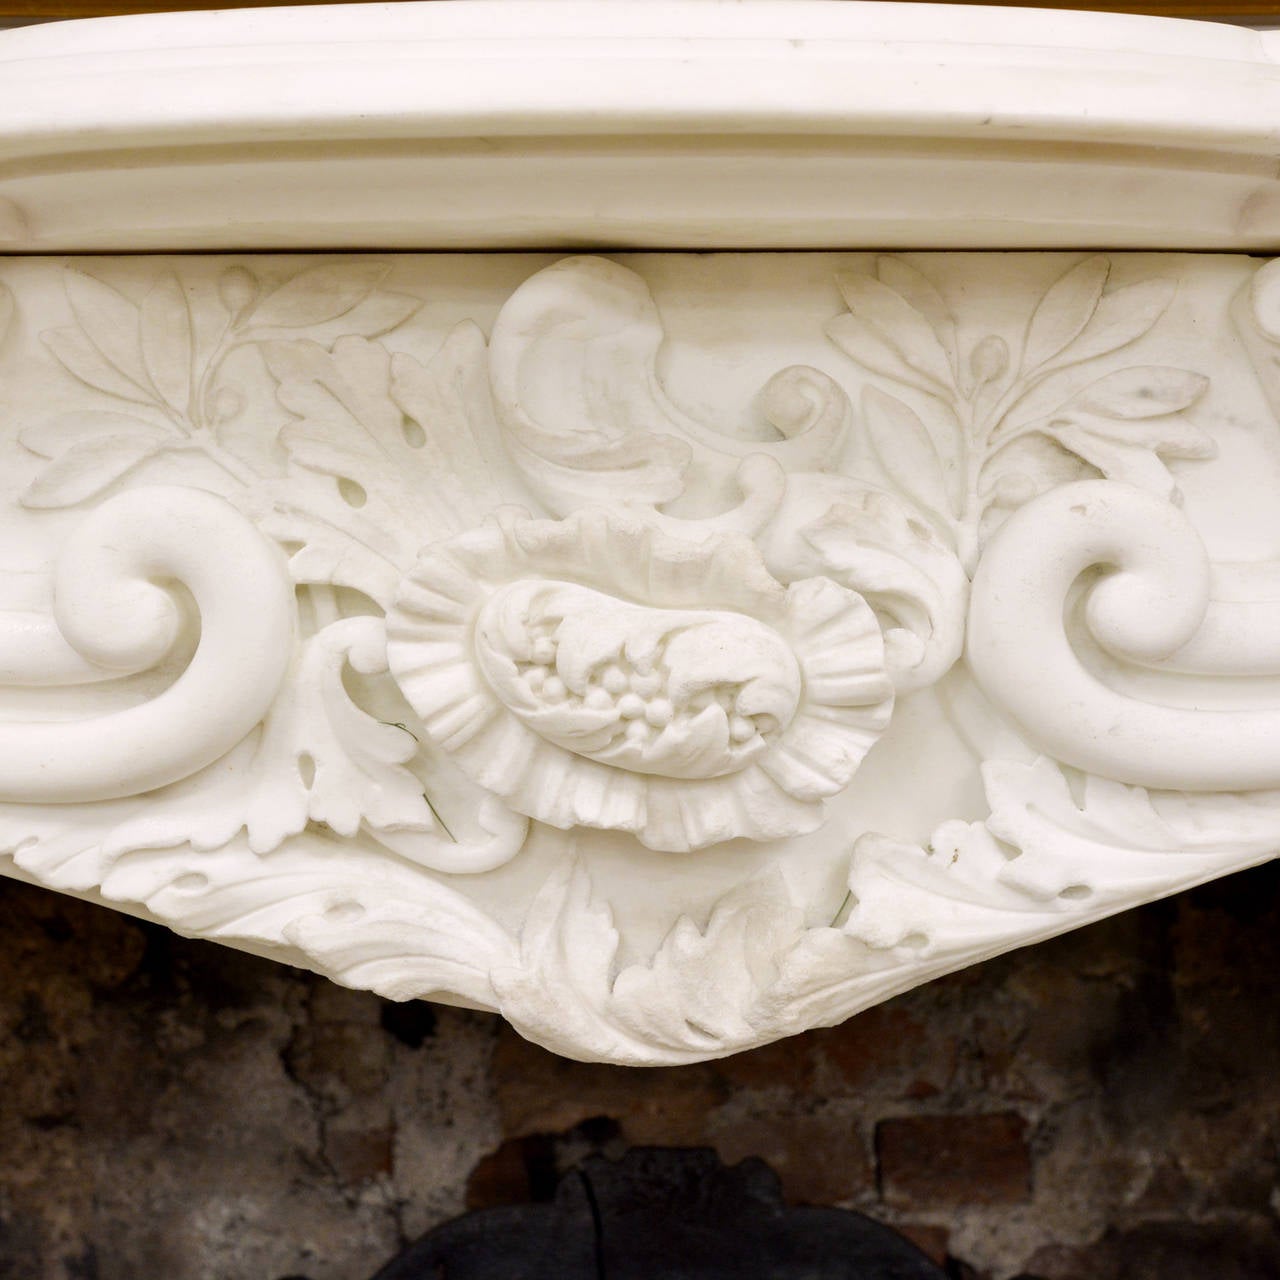 A large English Rococo Revival White Carrara marble chimneypiece, attributed to Benjamin Wyatt c.1830-1835, the serpentine shelf above frieze of leaves, flowers and scrolls carved in deep relief, flanked by acanthus detail above scallop shell motif,